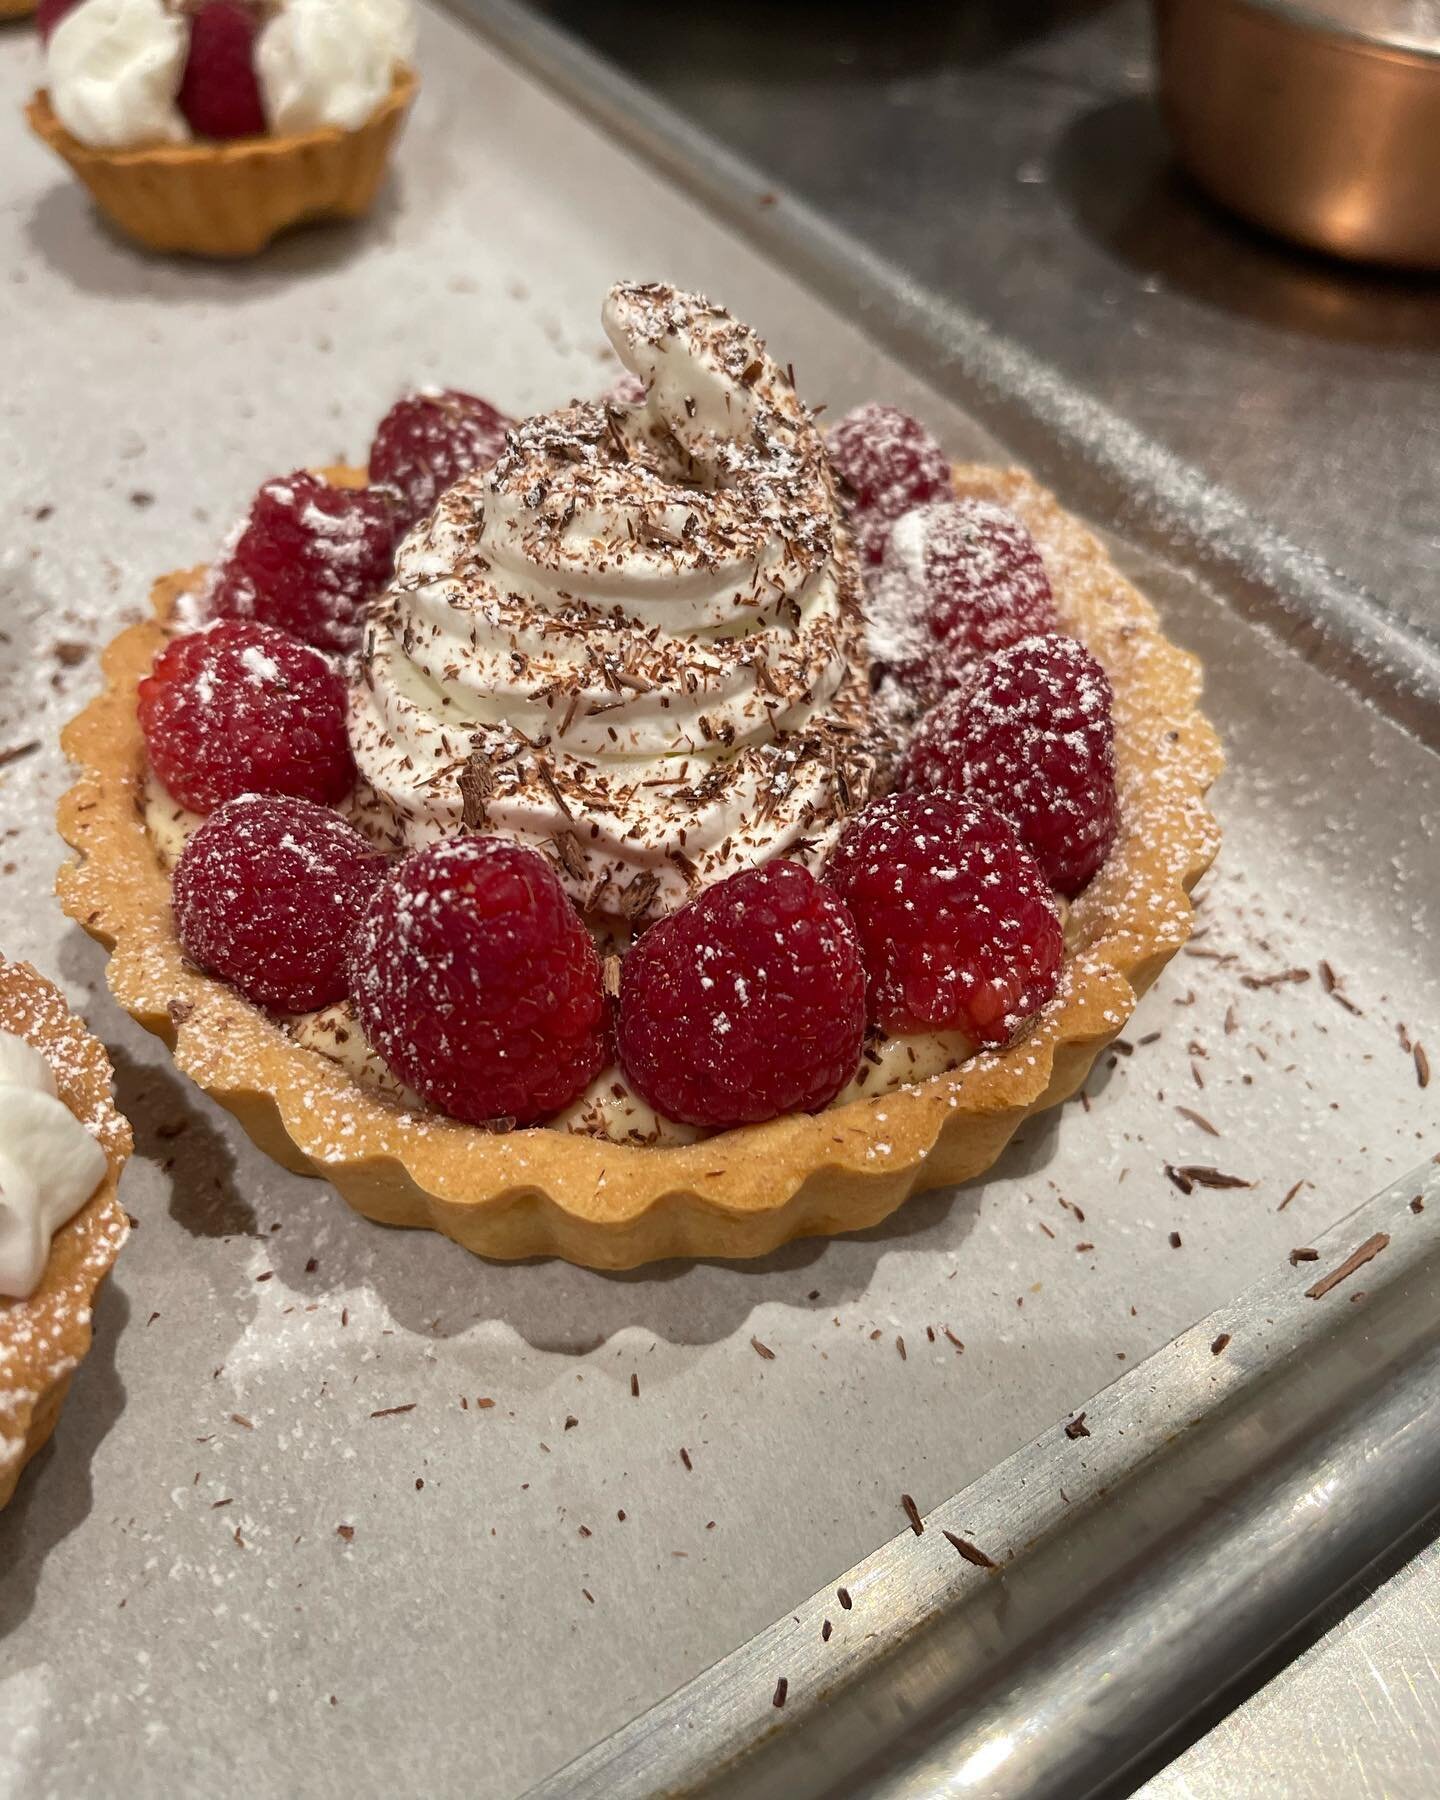 We welcome back one of our corporate clients- Team flying in from Finland, Spain, Brazil, and Ireland for our newest corporate team building event program, From the Bakery: Tarts.  We made p&acirc;te sucr&eacute;e and p&acirc;te bris&eacute;e .. dark